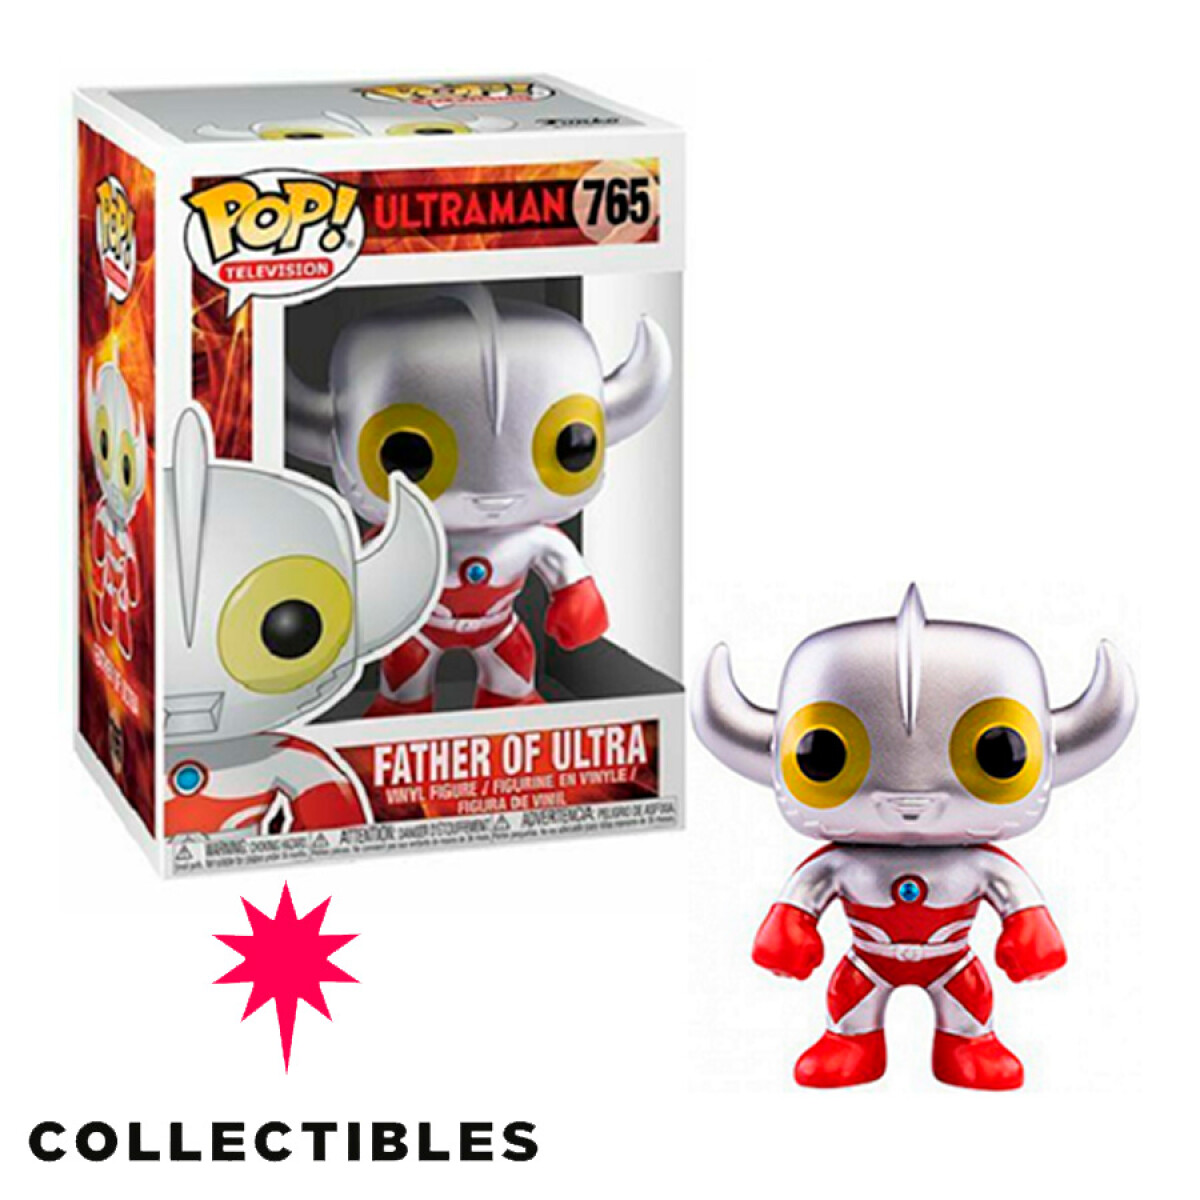 FUNKO POP! TELEVISION - ULTRAMAN - FATHER OF ULTRA 